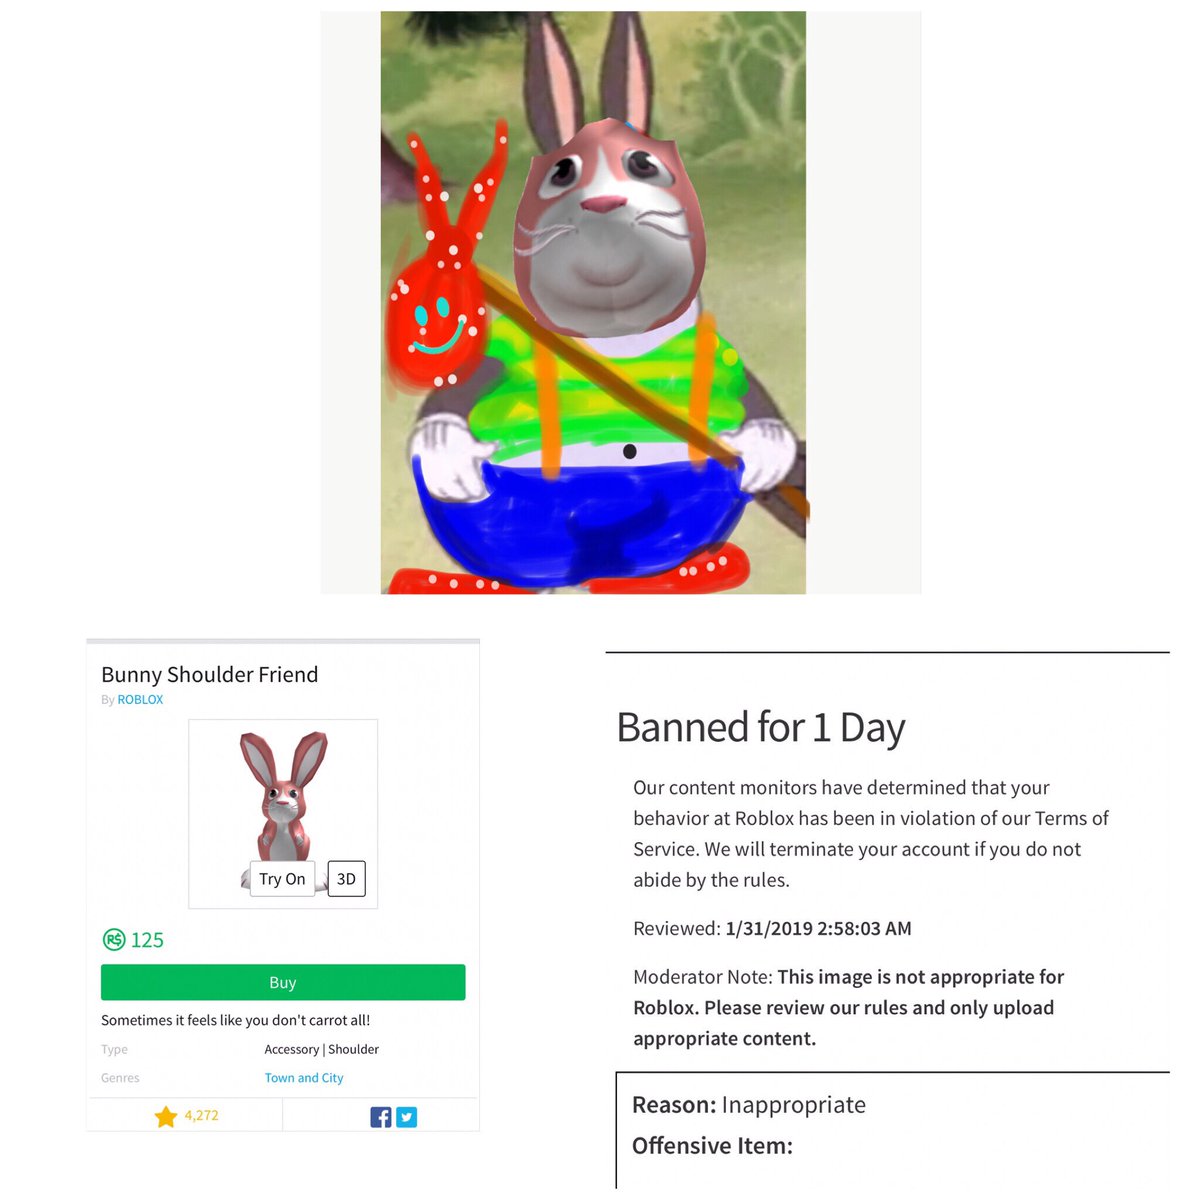 Hello Entertainment Bloxyawards Bloxys Roblox On Twitter Roblox Fat Shames And Discriminates Against Diverse Plus Sized Images Of Body Positivity Bans Its Own Pink Bunny In T Shirt Collage Image Https T Co Ikc9rojtxk - plus roblox account